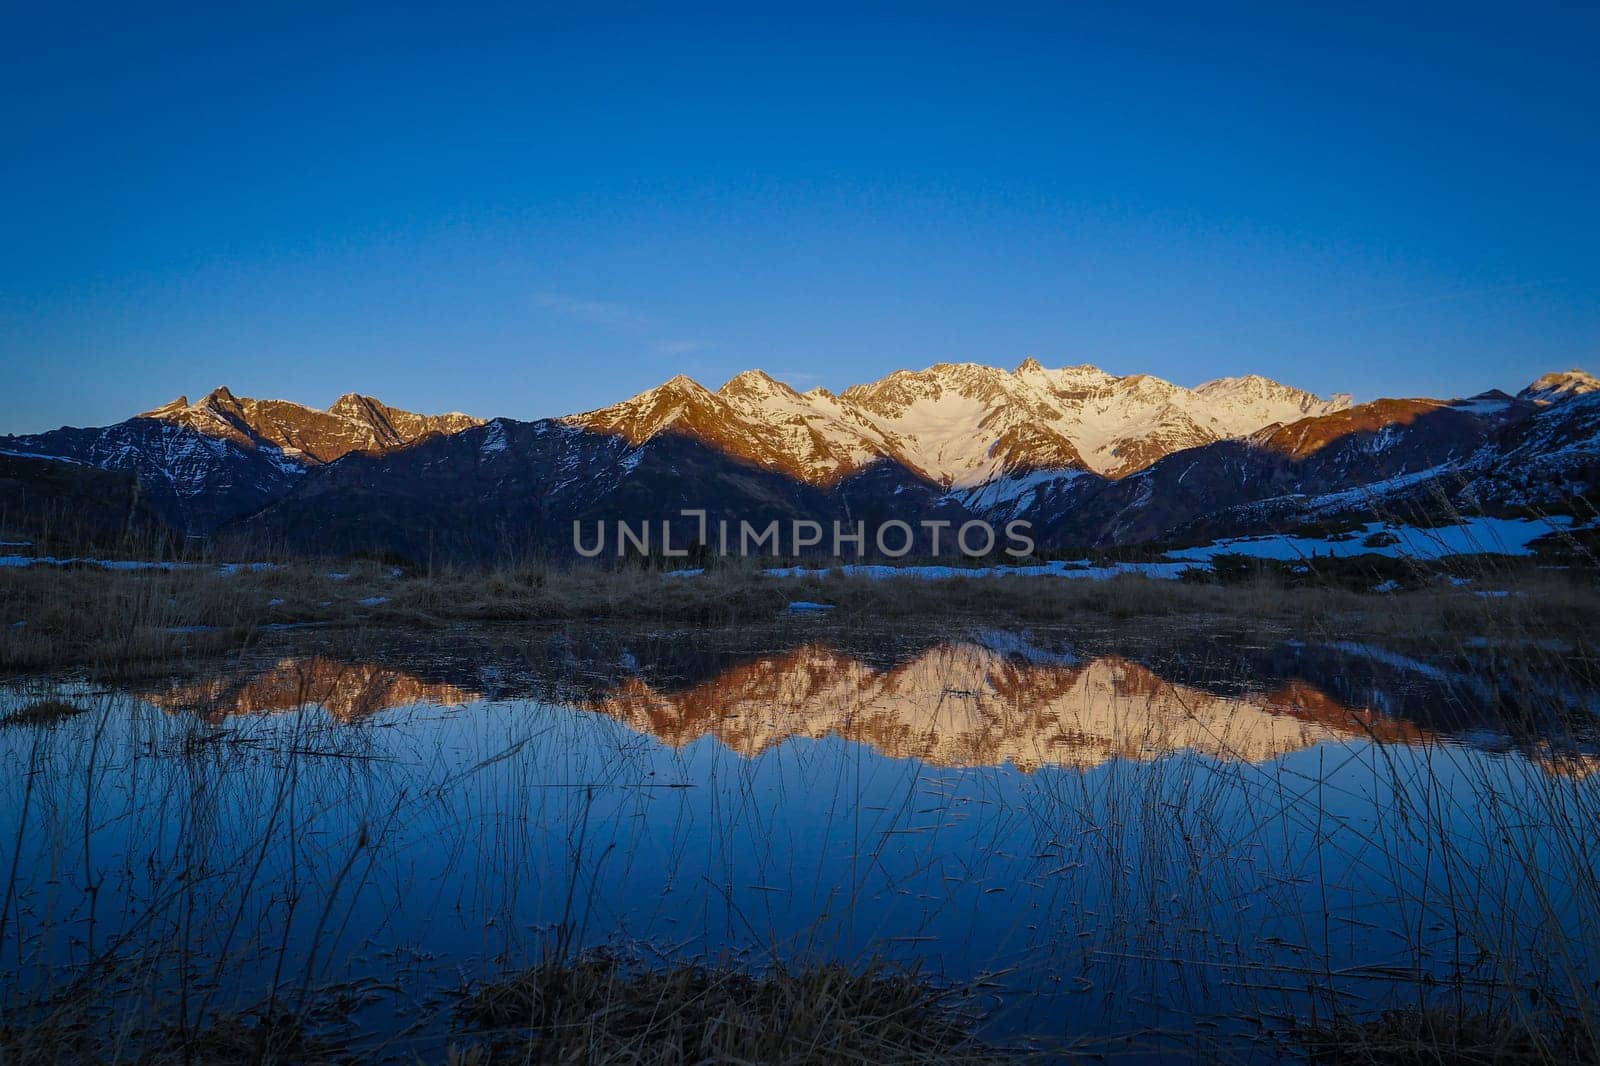 Sunset over the Pyrenees mountains with the reflection of the peaks in the water of the lake by FreeProd